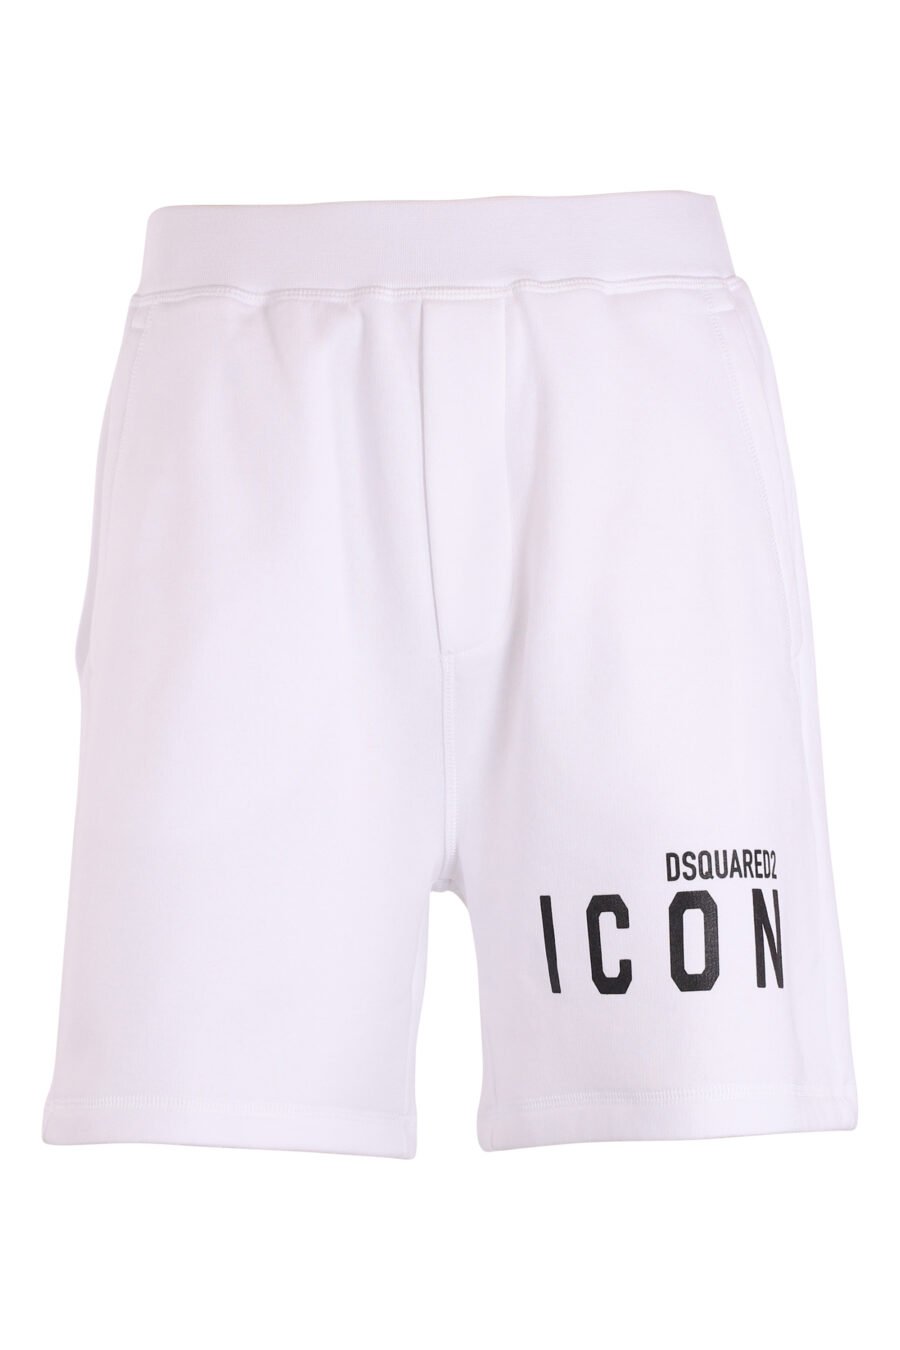 Tracksuit bottoms white with double side logo - IMG 8976